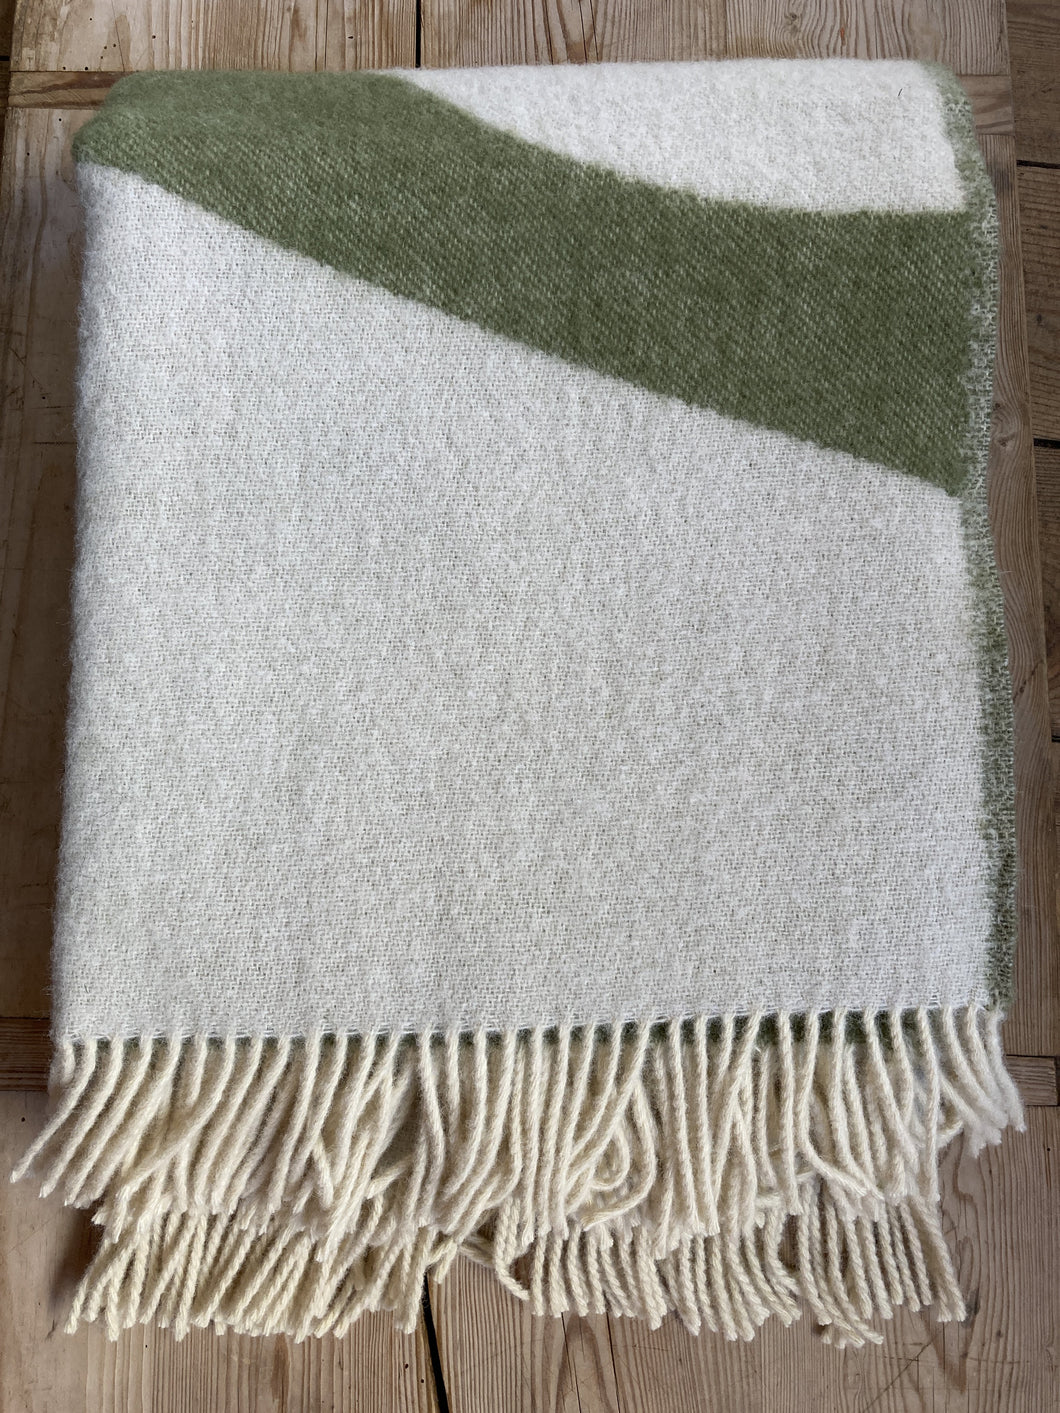 Forestry Wool Nature Green Blanket